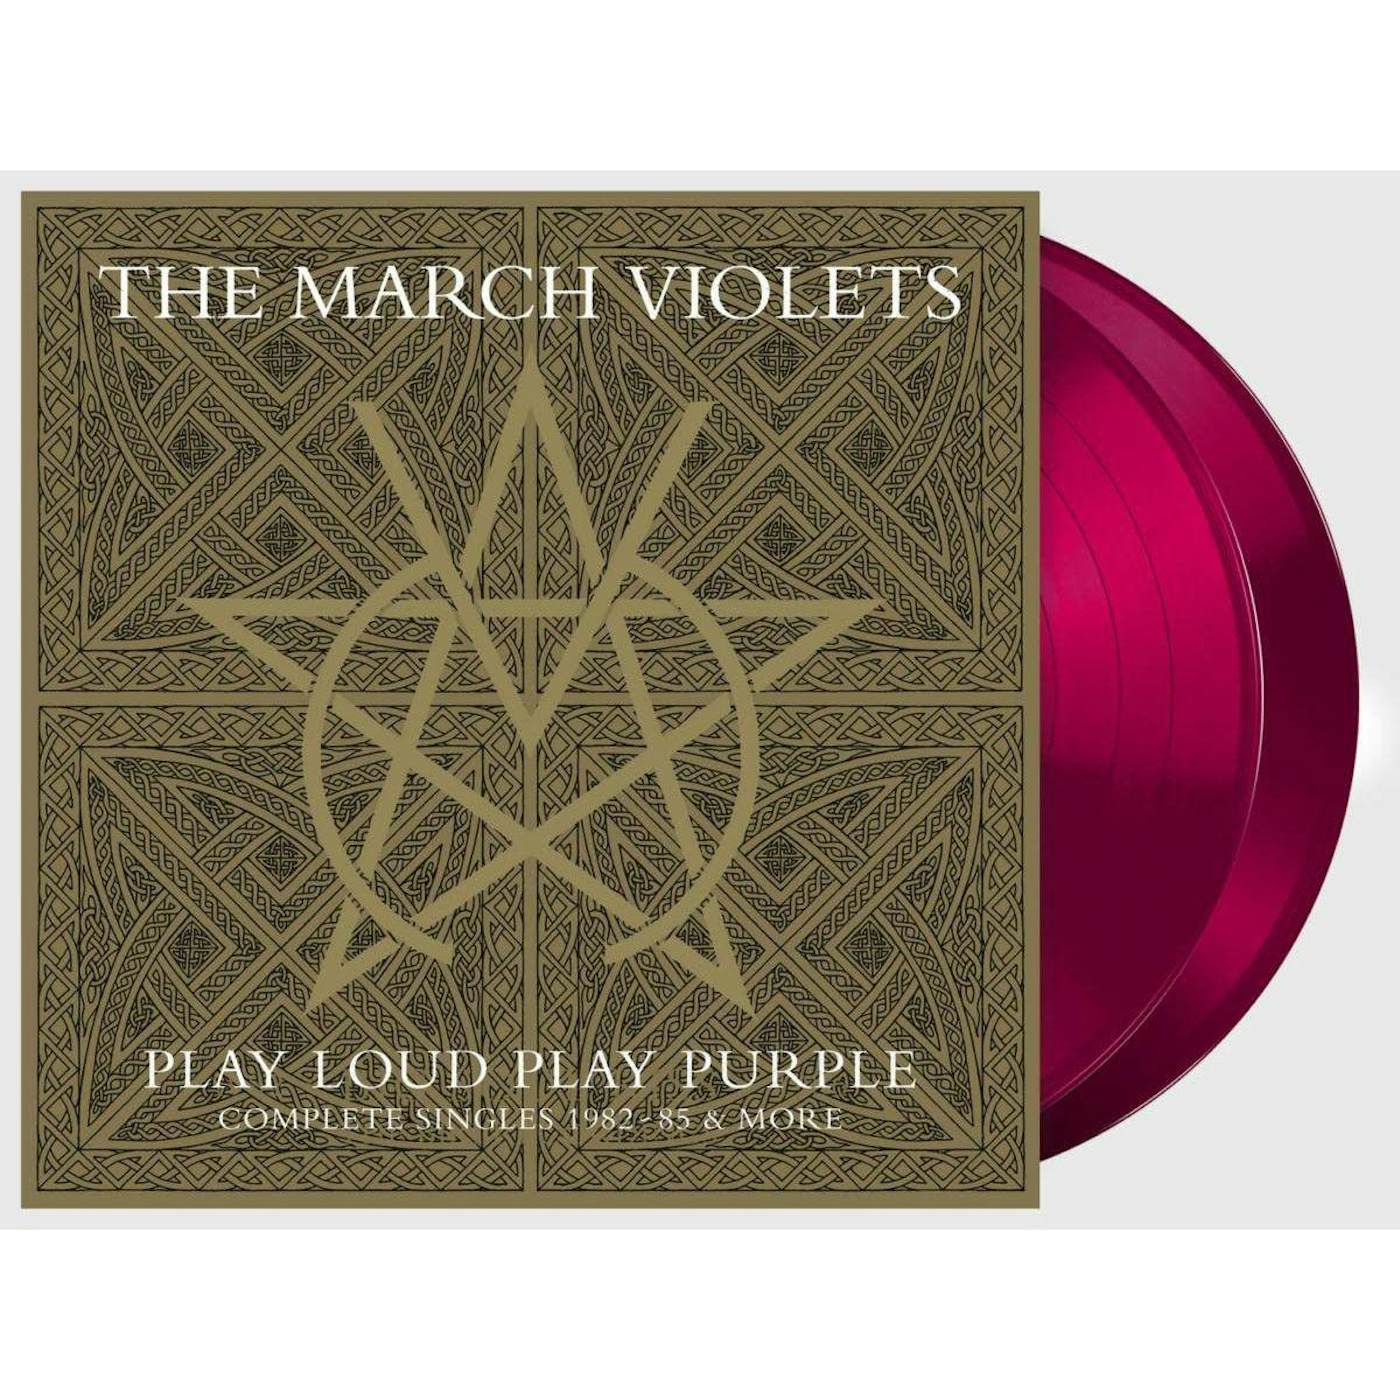 The March Violets PLAY LOUD PLAY PURPLE Vinyl Record